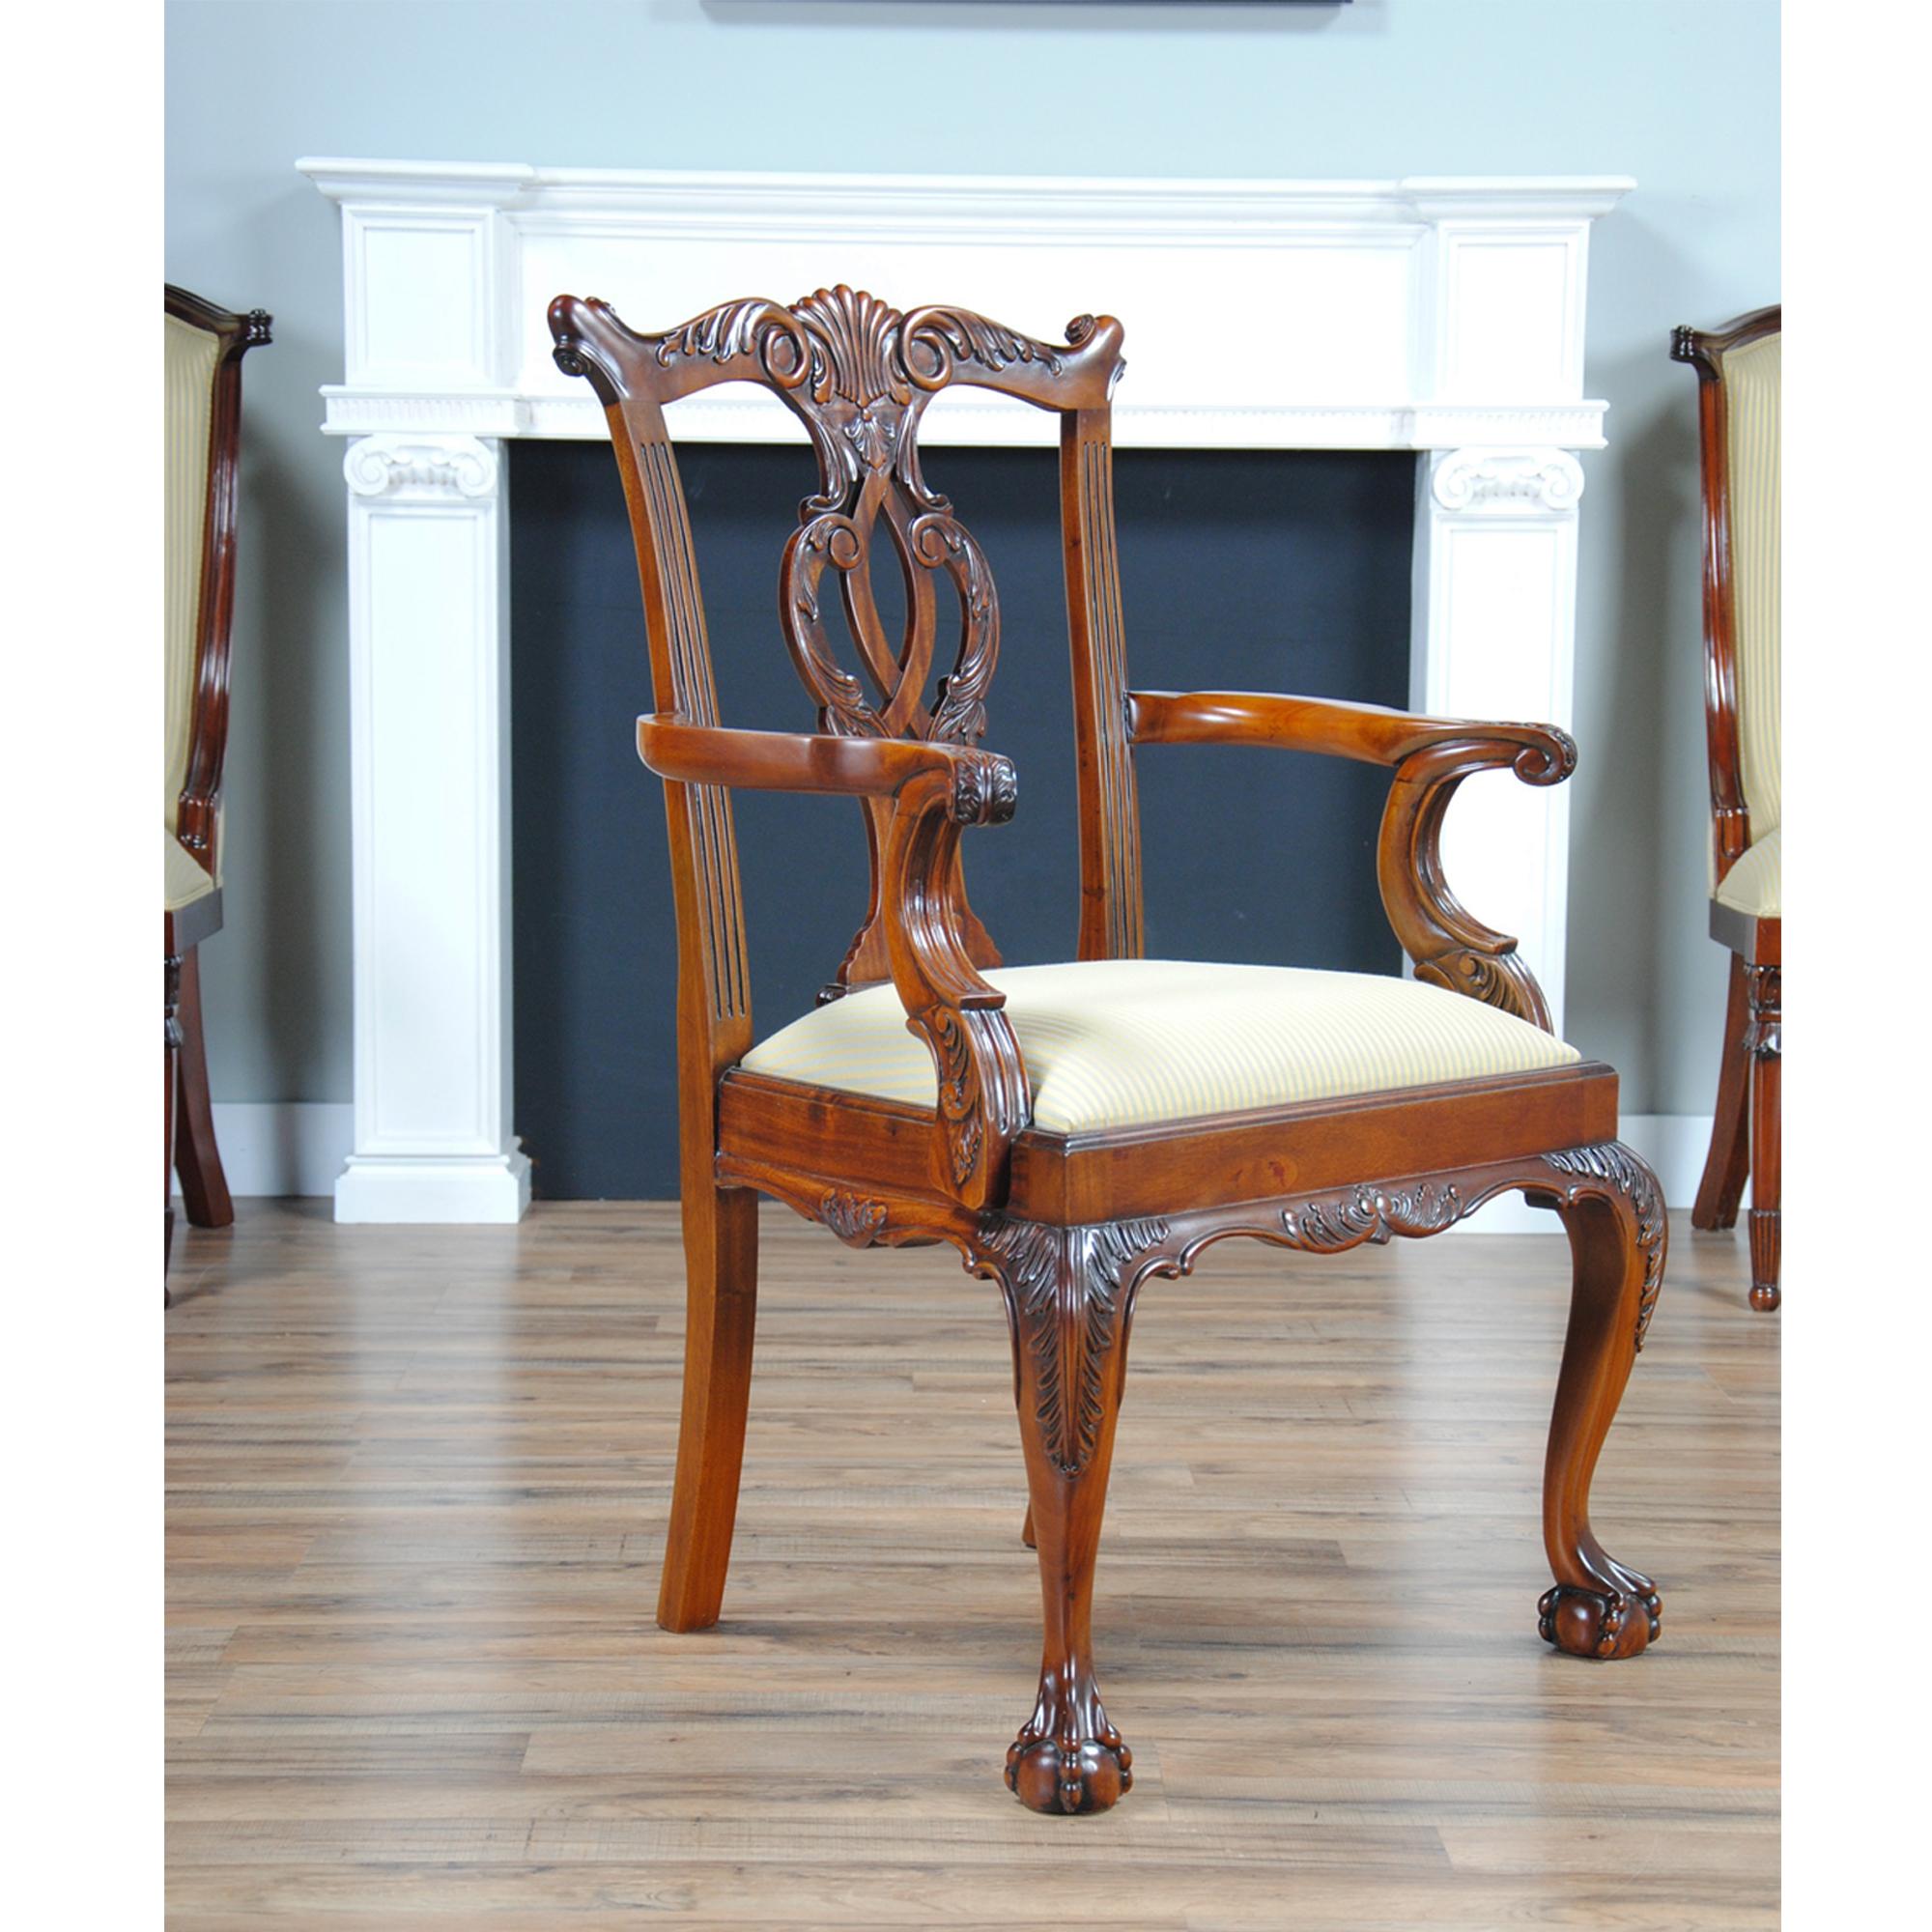 This set of 10 Cambridge Mahogany Chairs is made up of 2 arm chairs and 8 side chairs. When creating this chair we took all of the most popular design elements from our favorite Chippendale inspired chairs and combined them to create this model.